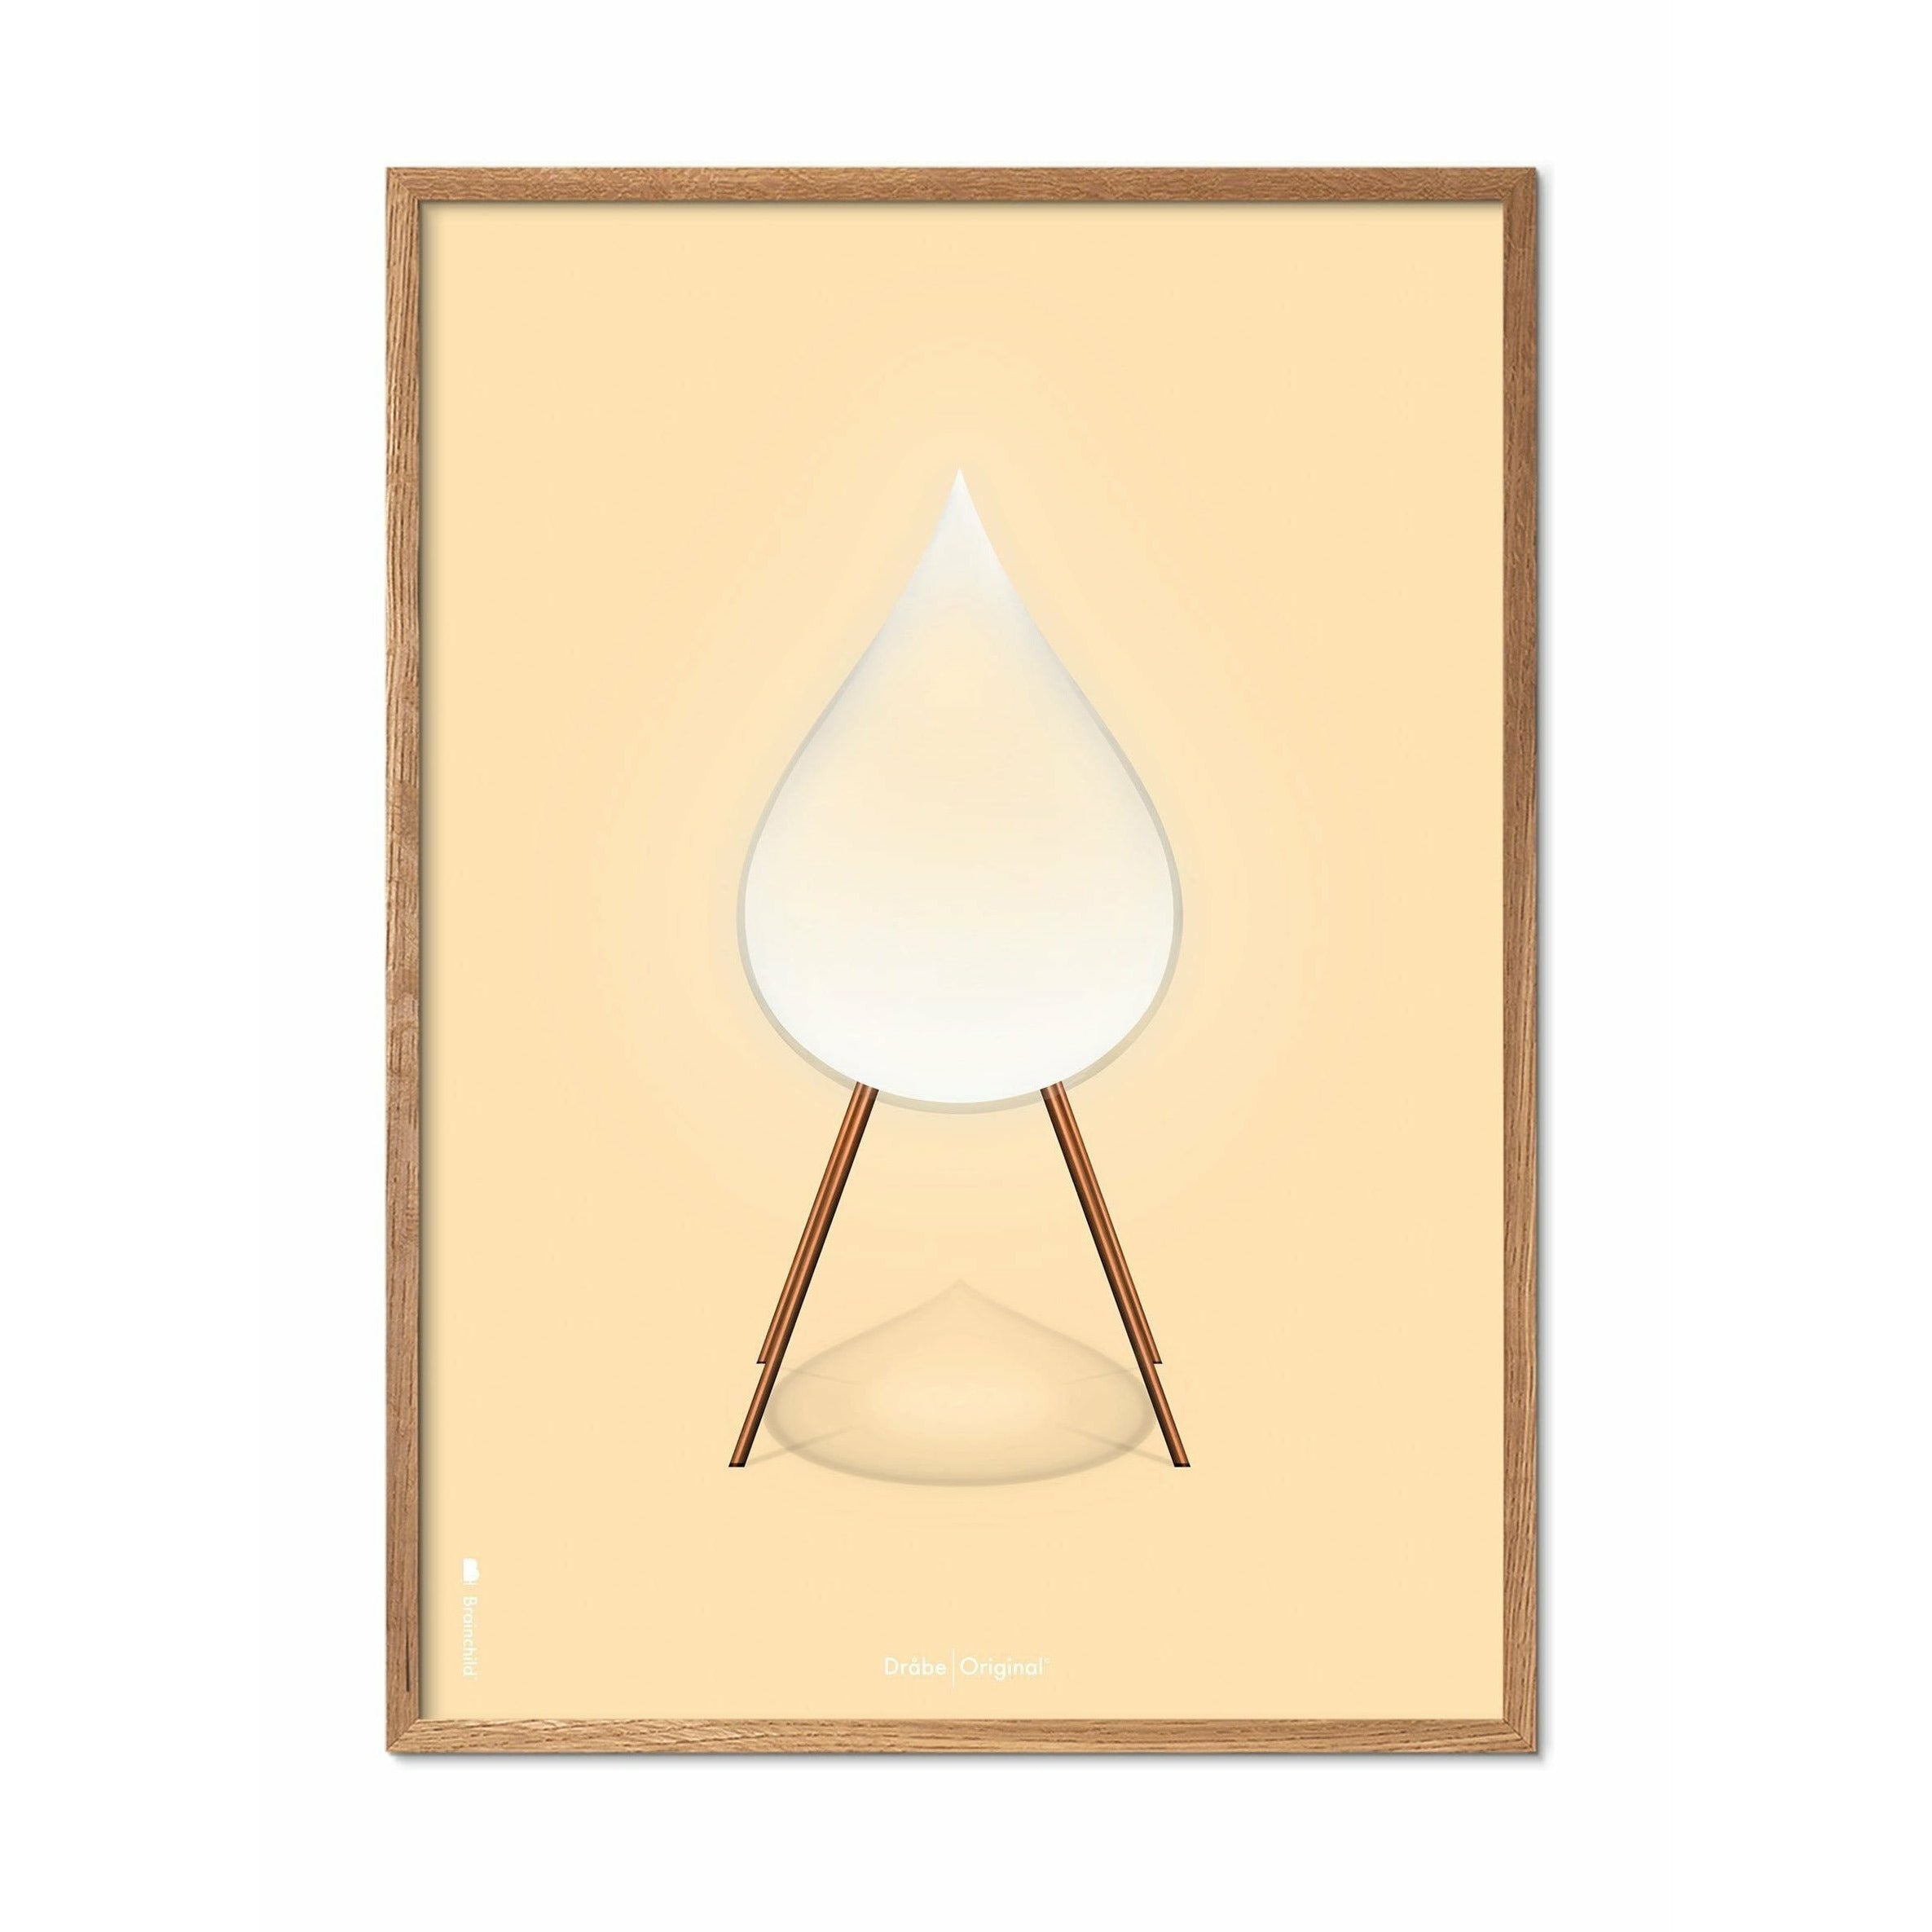 Brainchild Drop Classic Poster, Frame Made Of Light Wood 70x100 Cm, Sand Colored Background